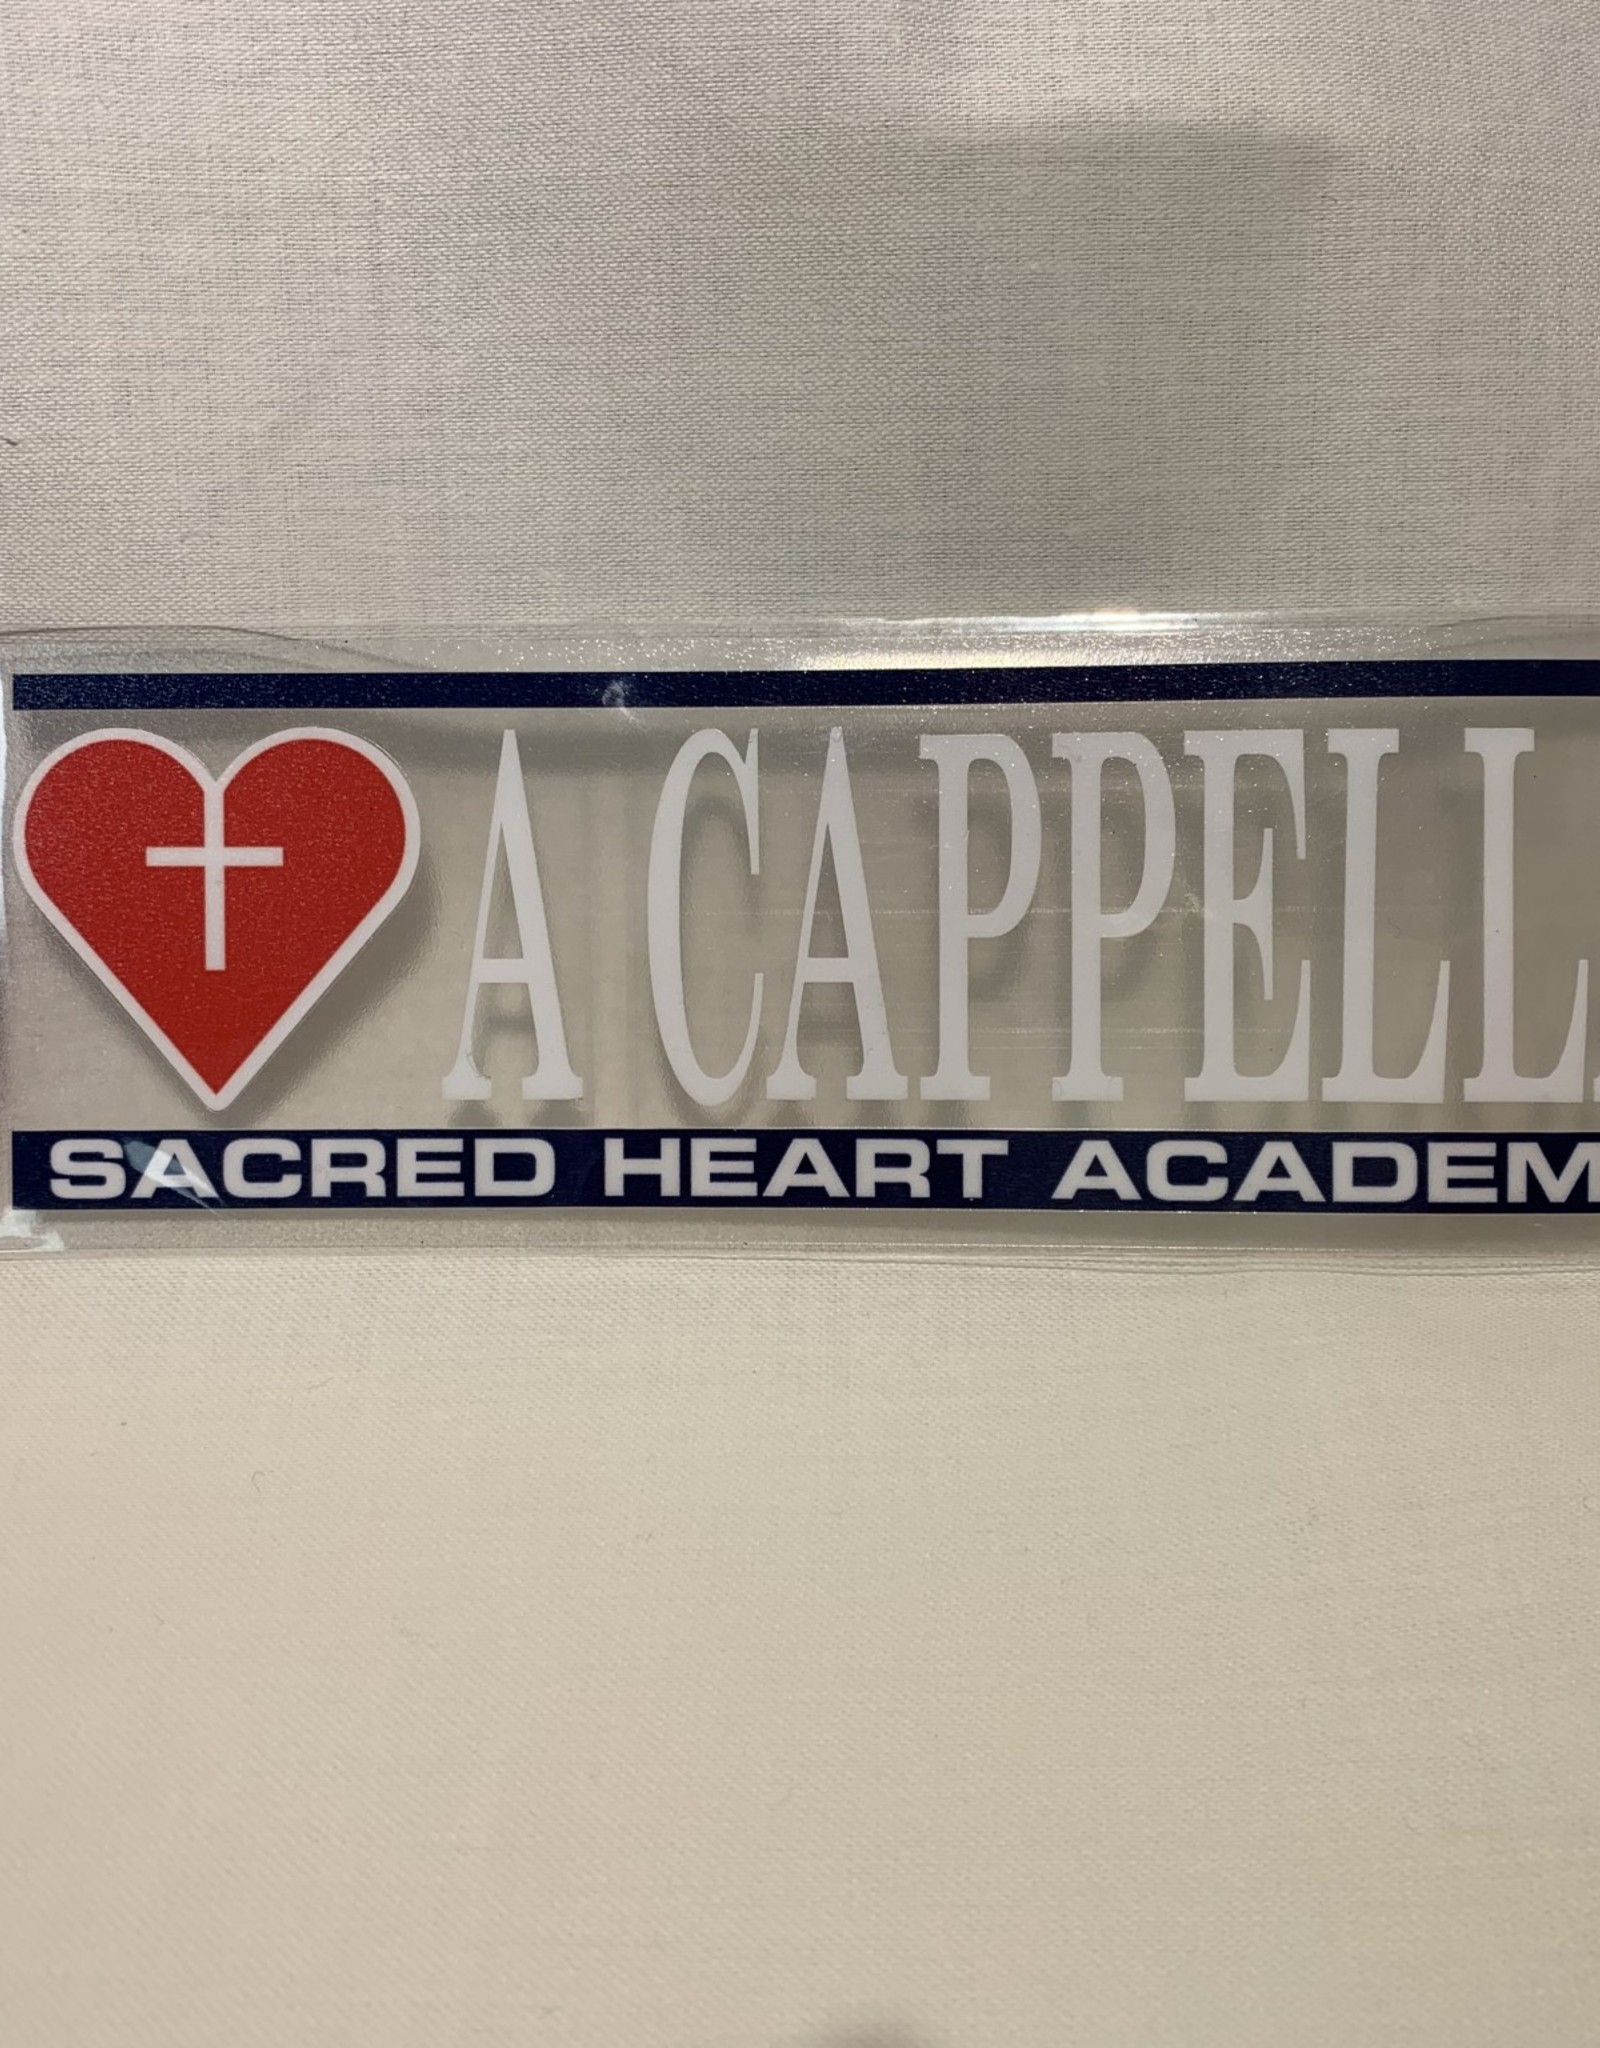 ANGELUS PACIFIC A CAPPELLA CAR DECAL